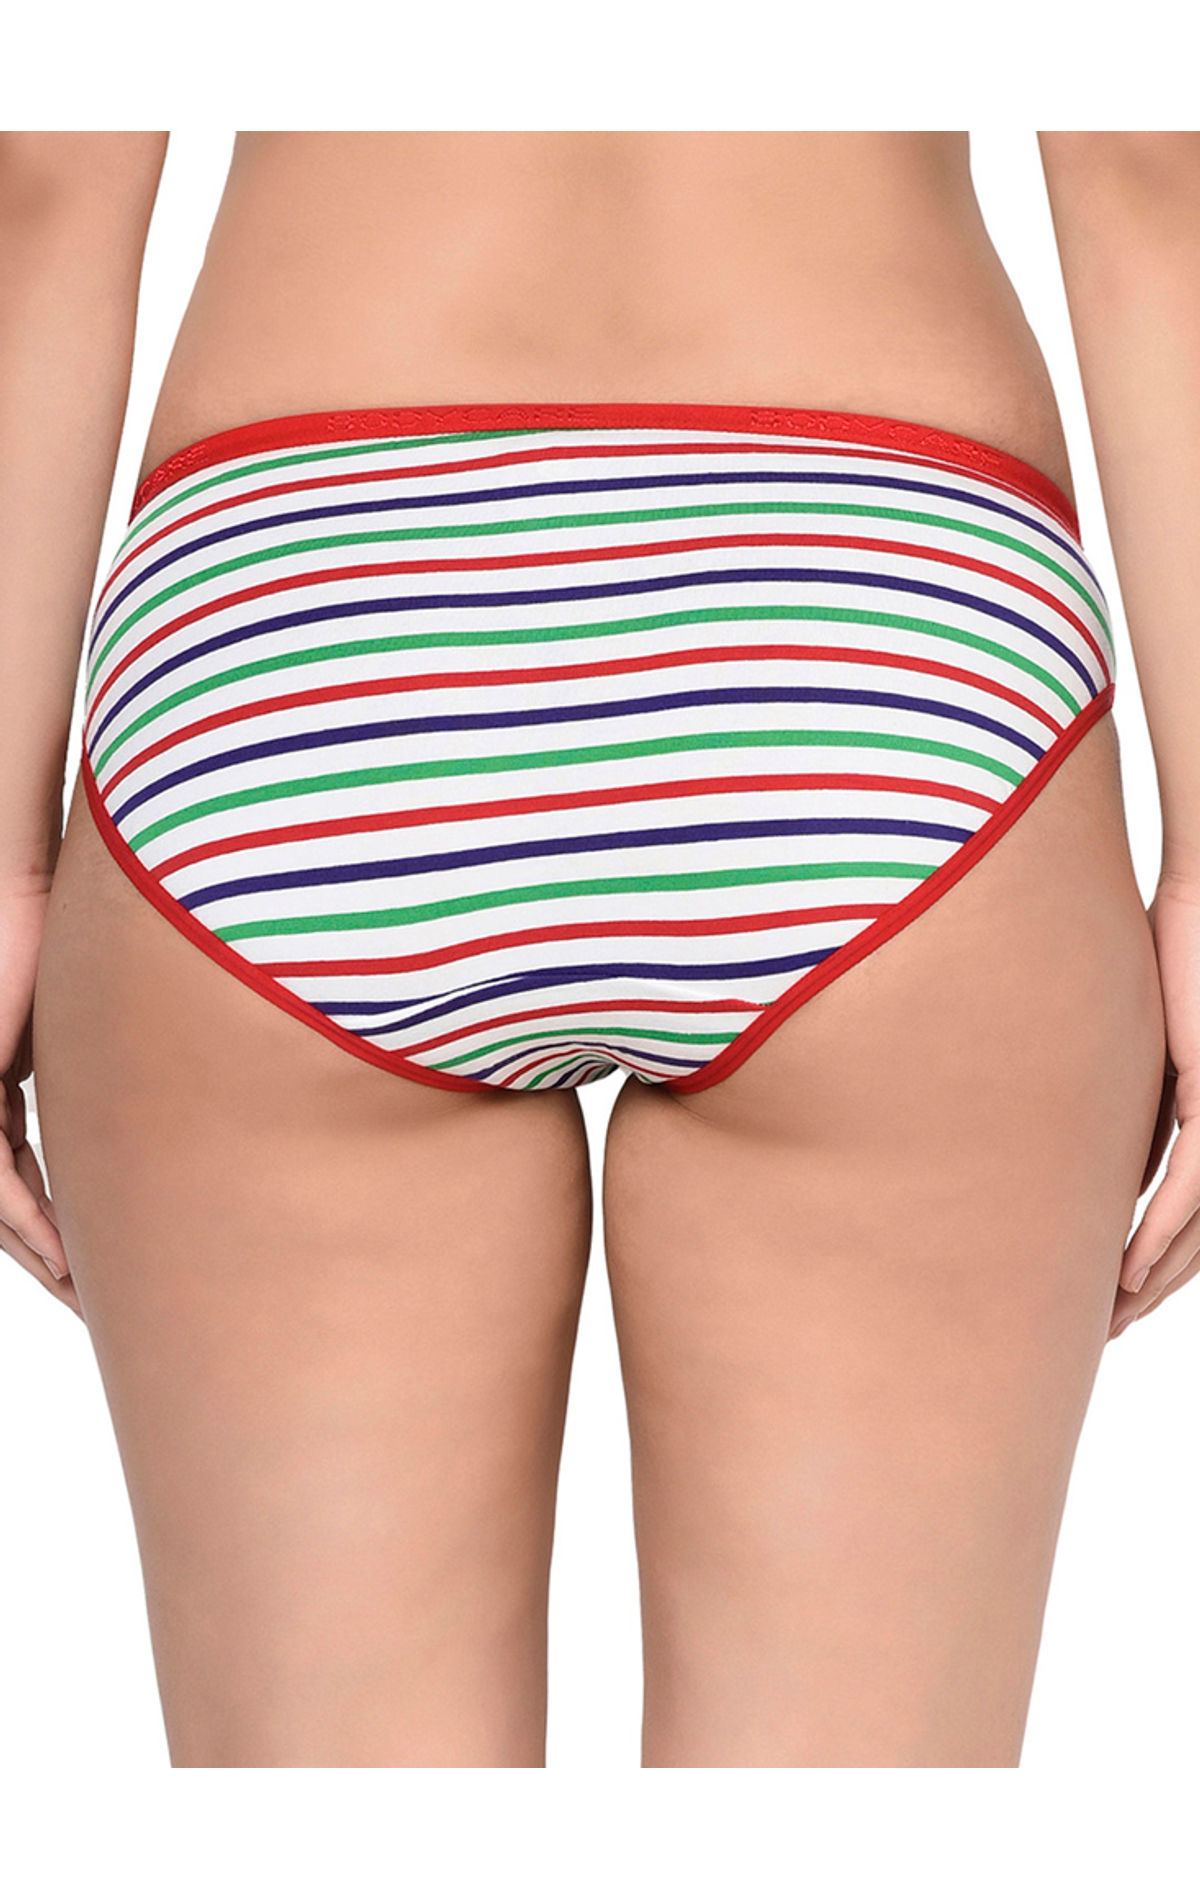 Bodycare Pack Of 3 Stripes Hipster Panty In Assorted Print-9460, 9460-3pcs